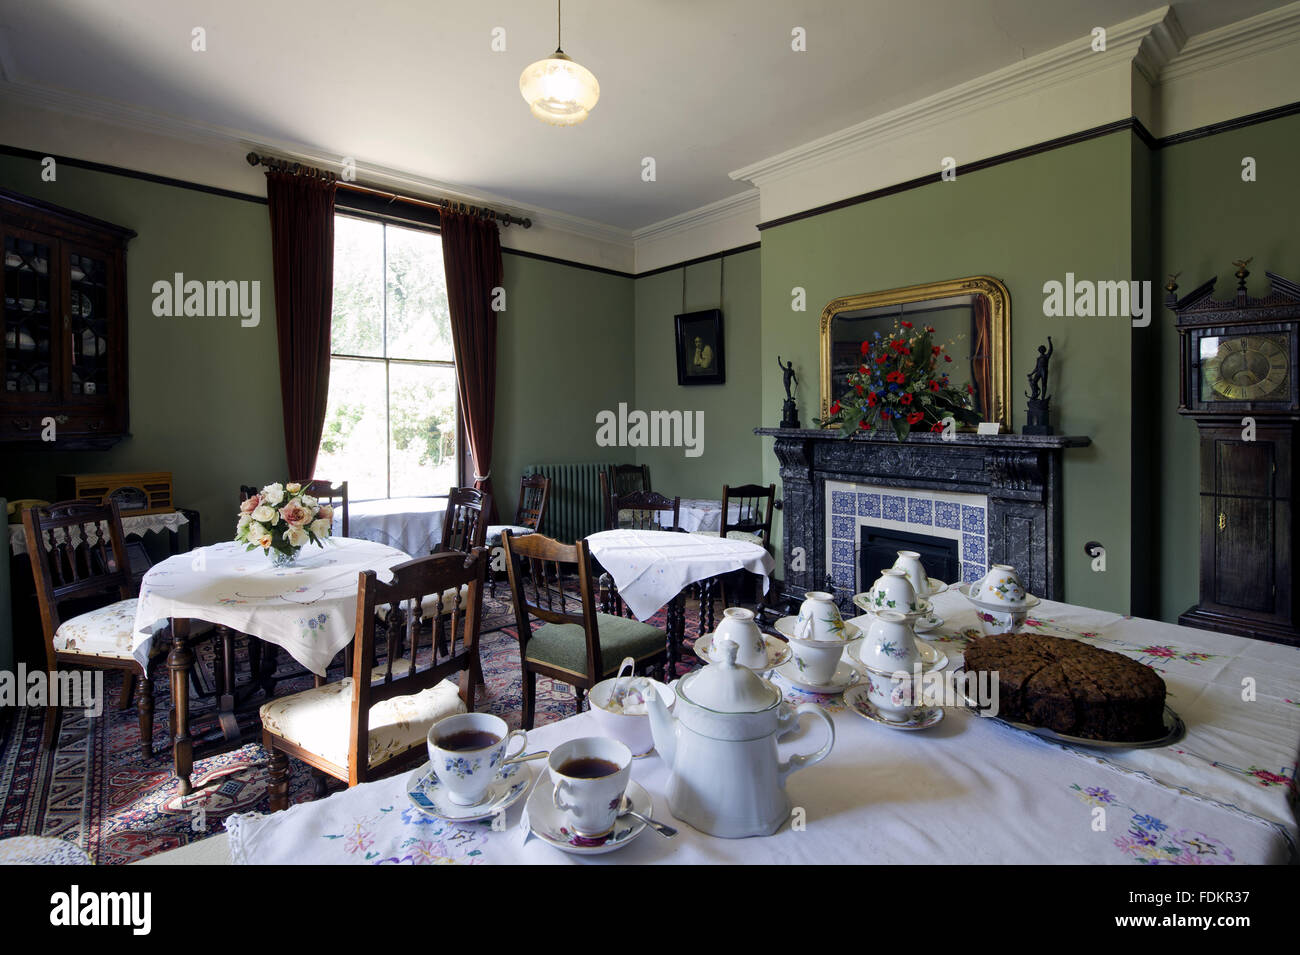 The Dining Room at Sunnycroft, Shropshire. Stock Photo